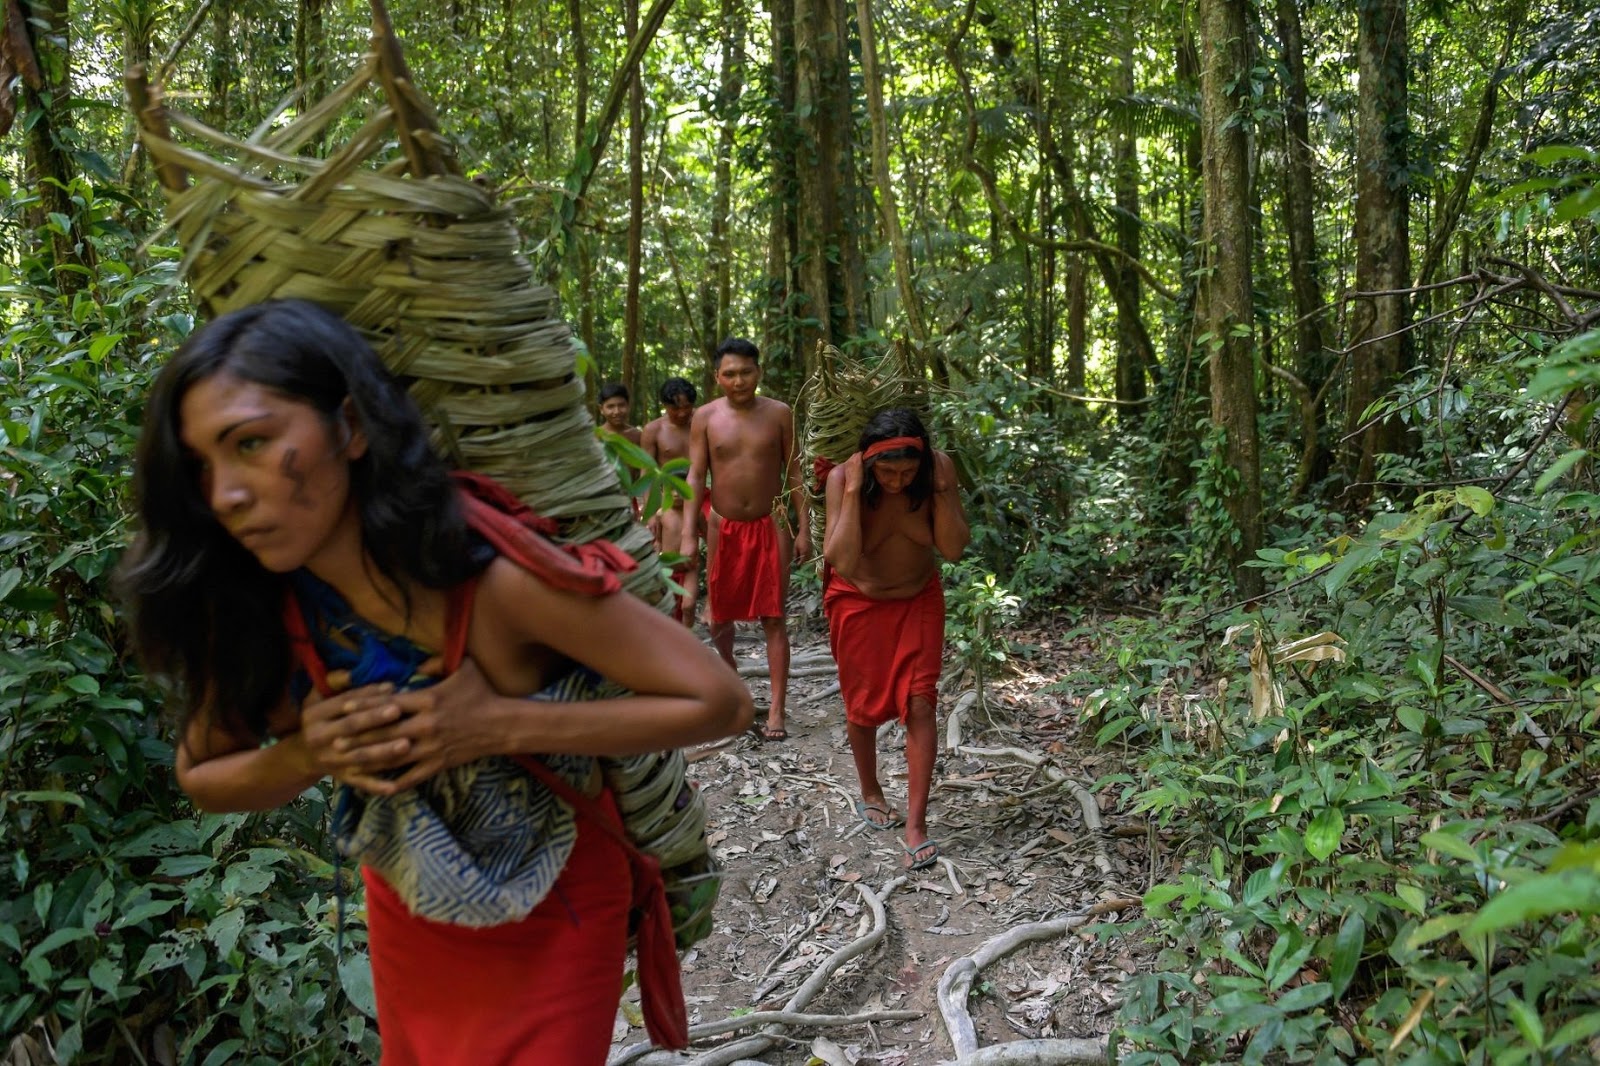 Incredible Images Capture The Lives Of Amazonian Waiapi Tribe As They Battl...